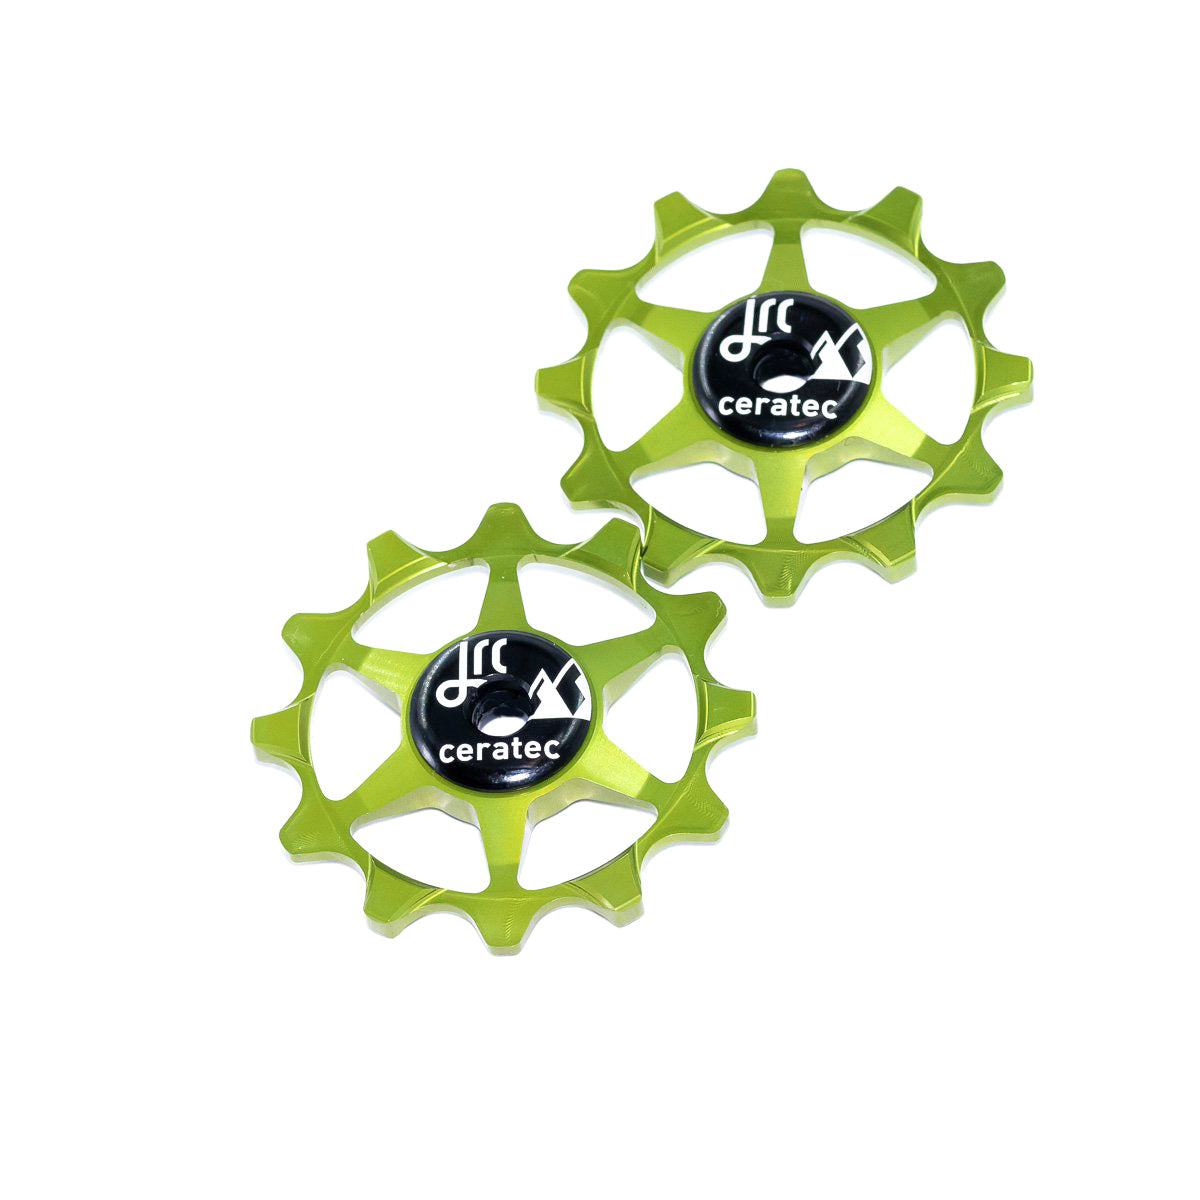 Acid green, lightweight aluminium pulley wheel set for bicycles, 12 tooth, narrow/wide, for Sram 1x Mono Systems